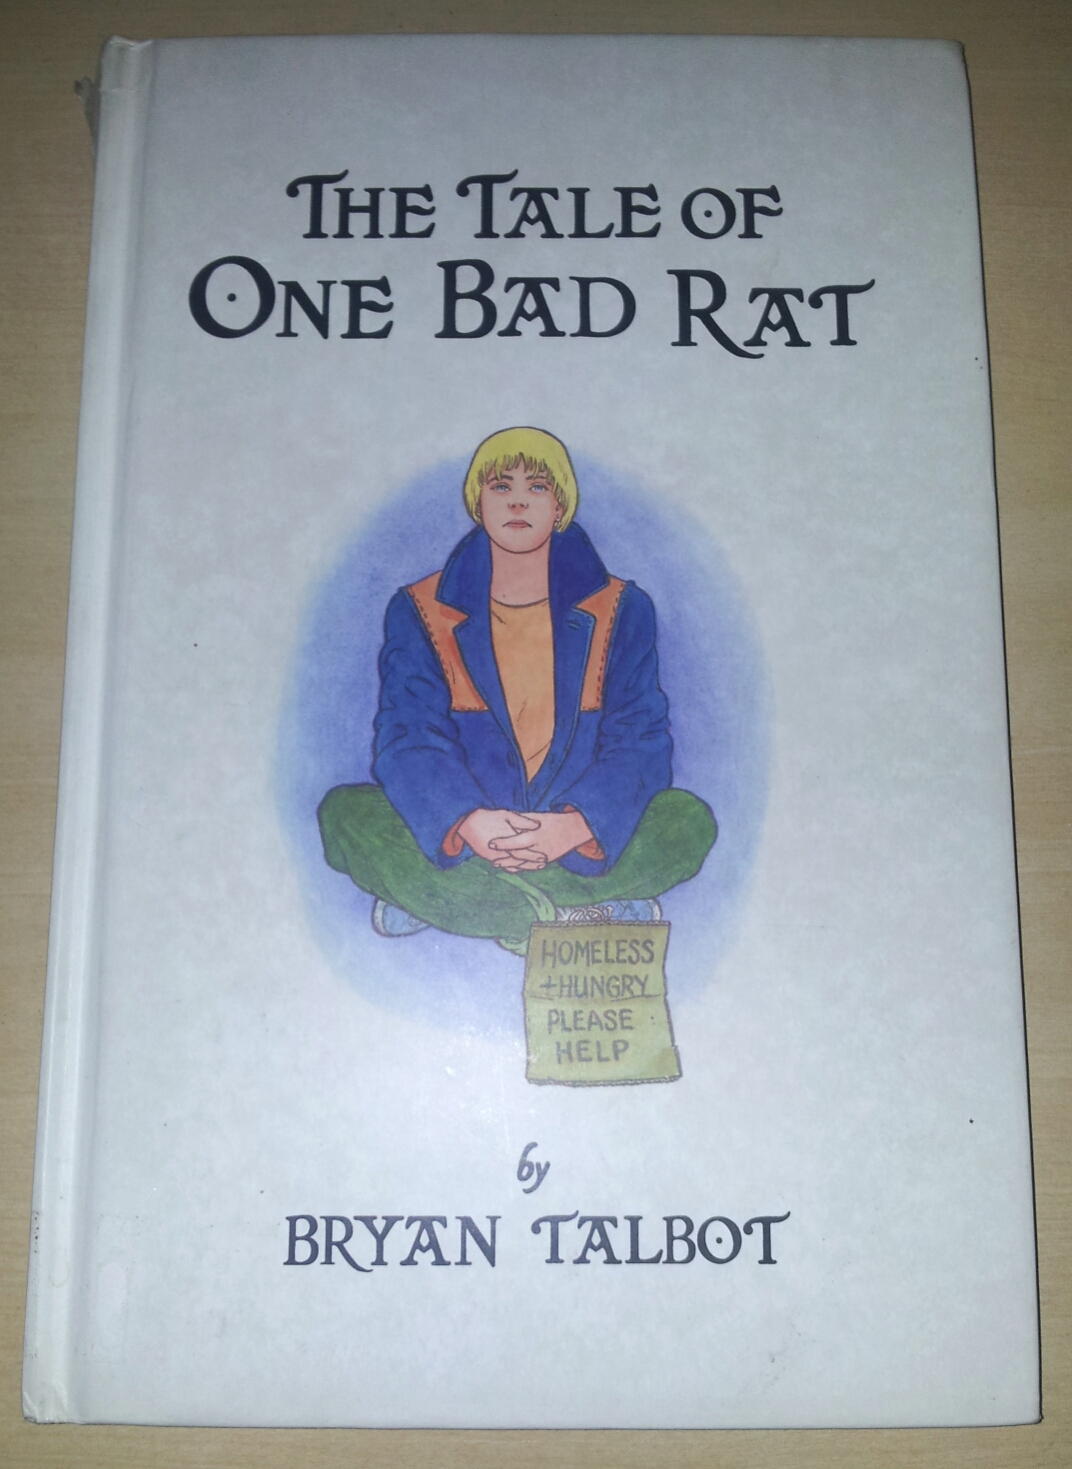 THE TALE OF ONE BAD RAT | REVIEW